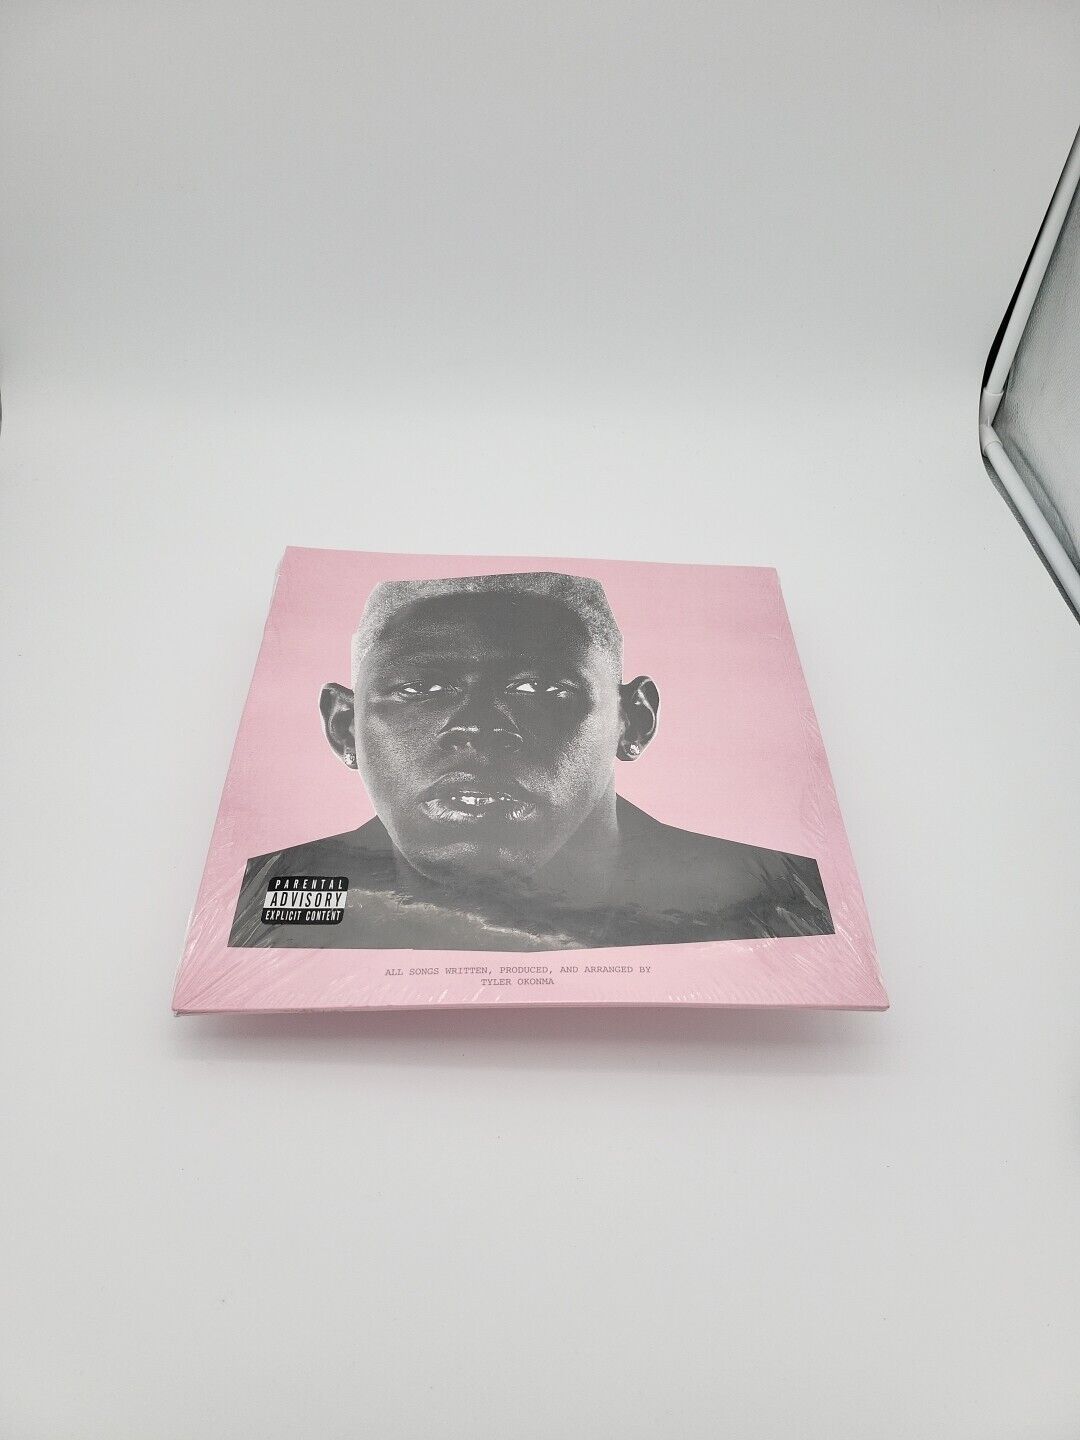 Igor by Tyler the Creator (Record, 2019) Rap Slightly Warped Carboard Sleeve NEW